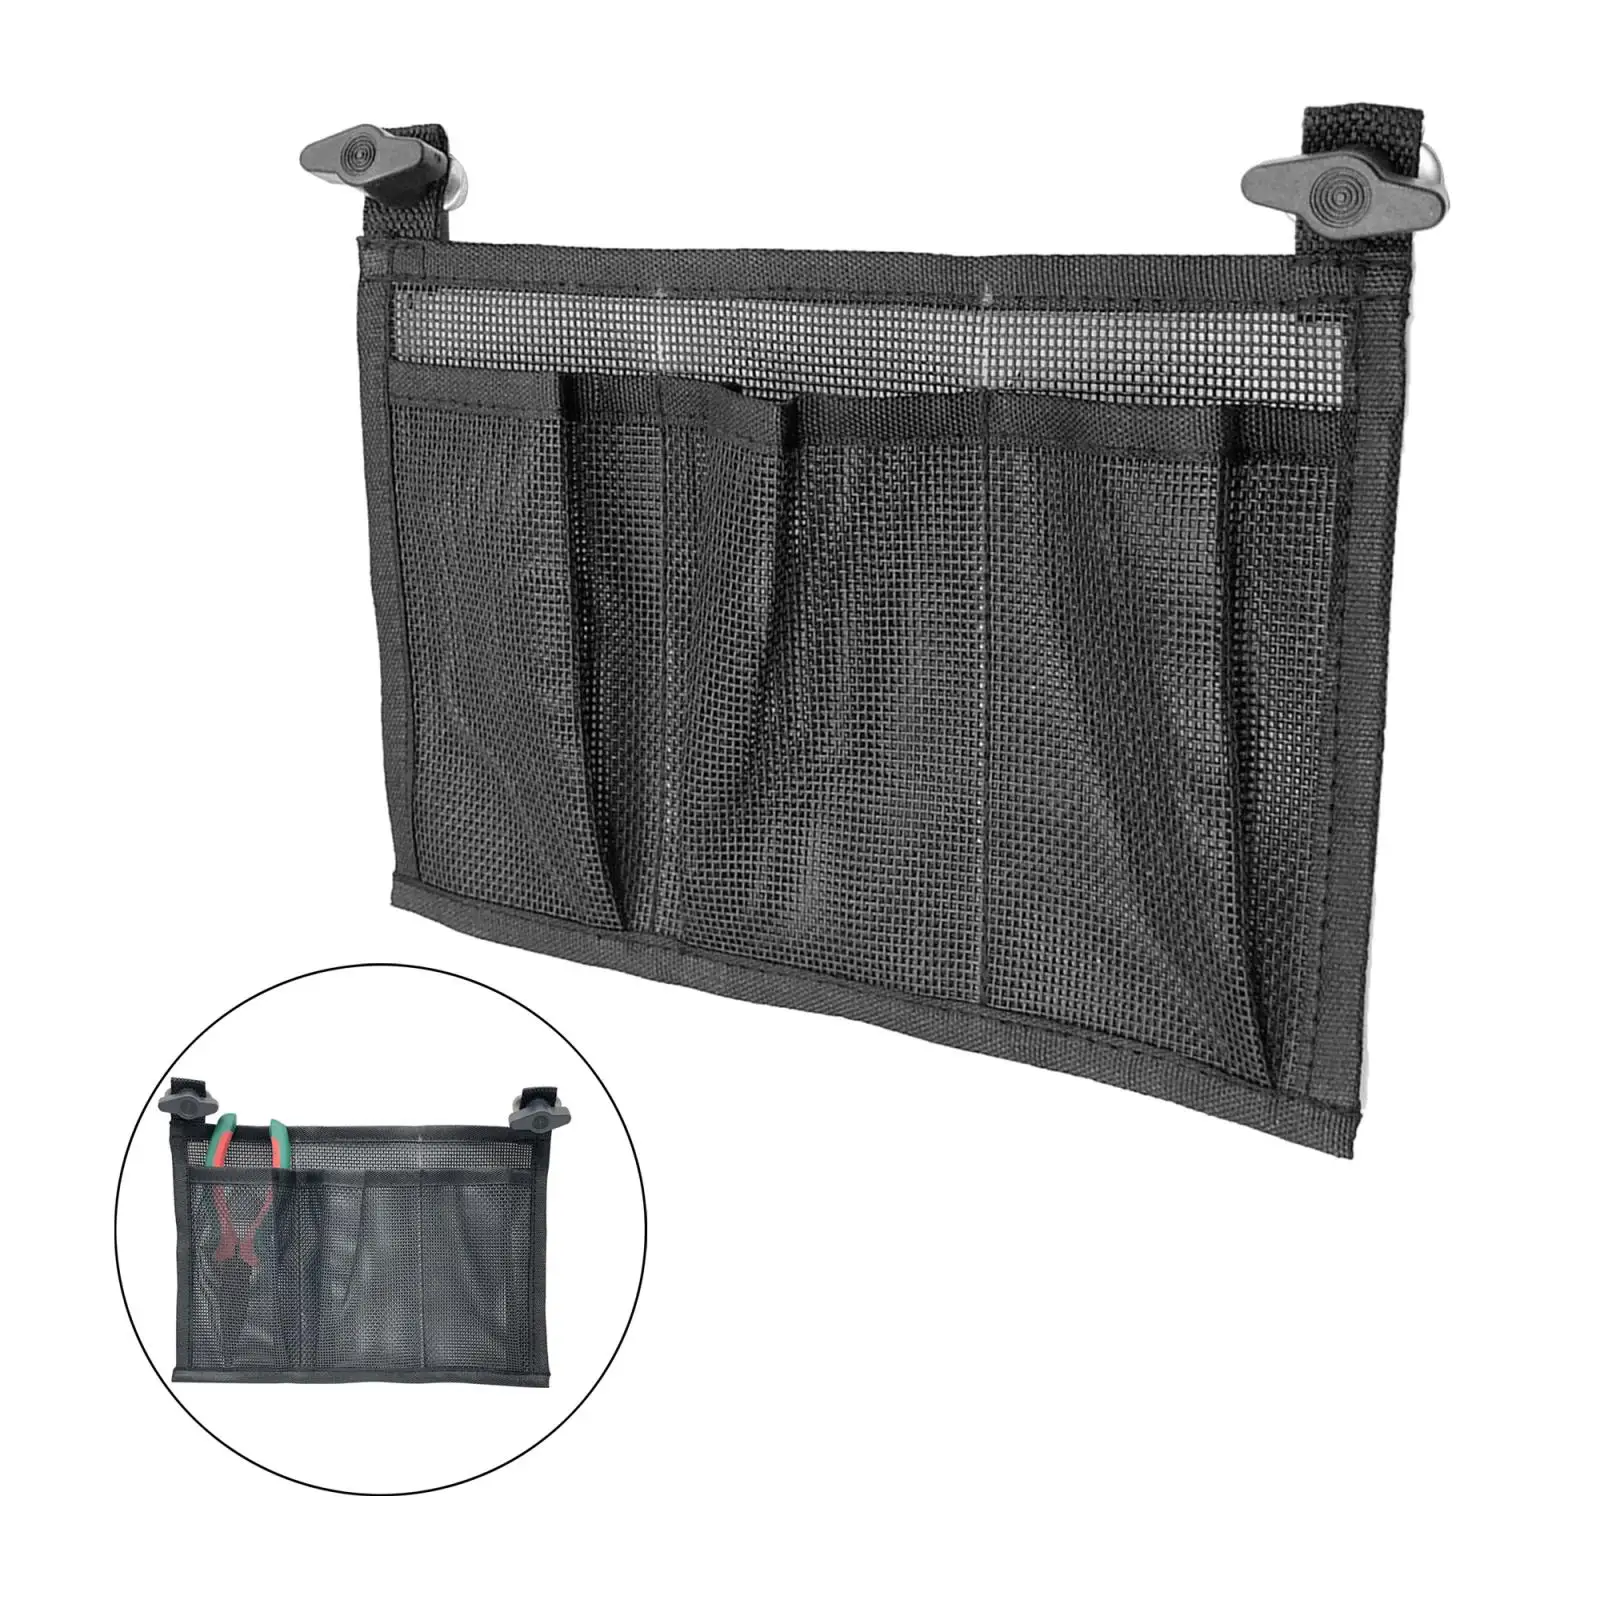 Nylon Mesh Pouch, Drawstring Bags for Travel, Camping Hammock, Kayak, Fishng Boat Tools Tackles Gear Storage Side Pouch